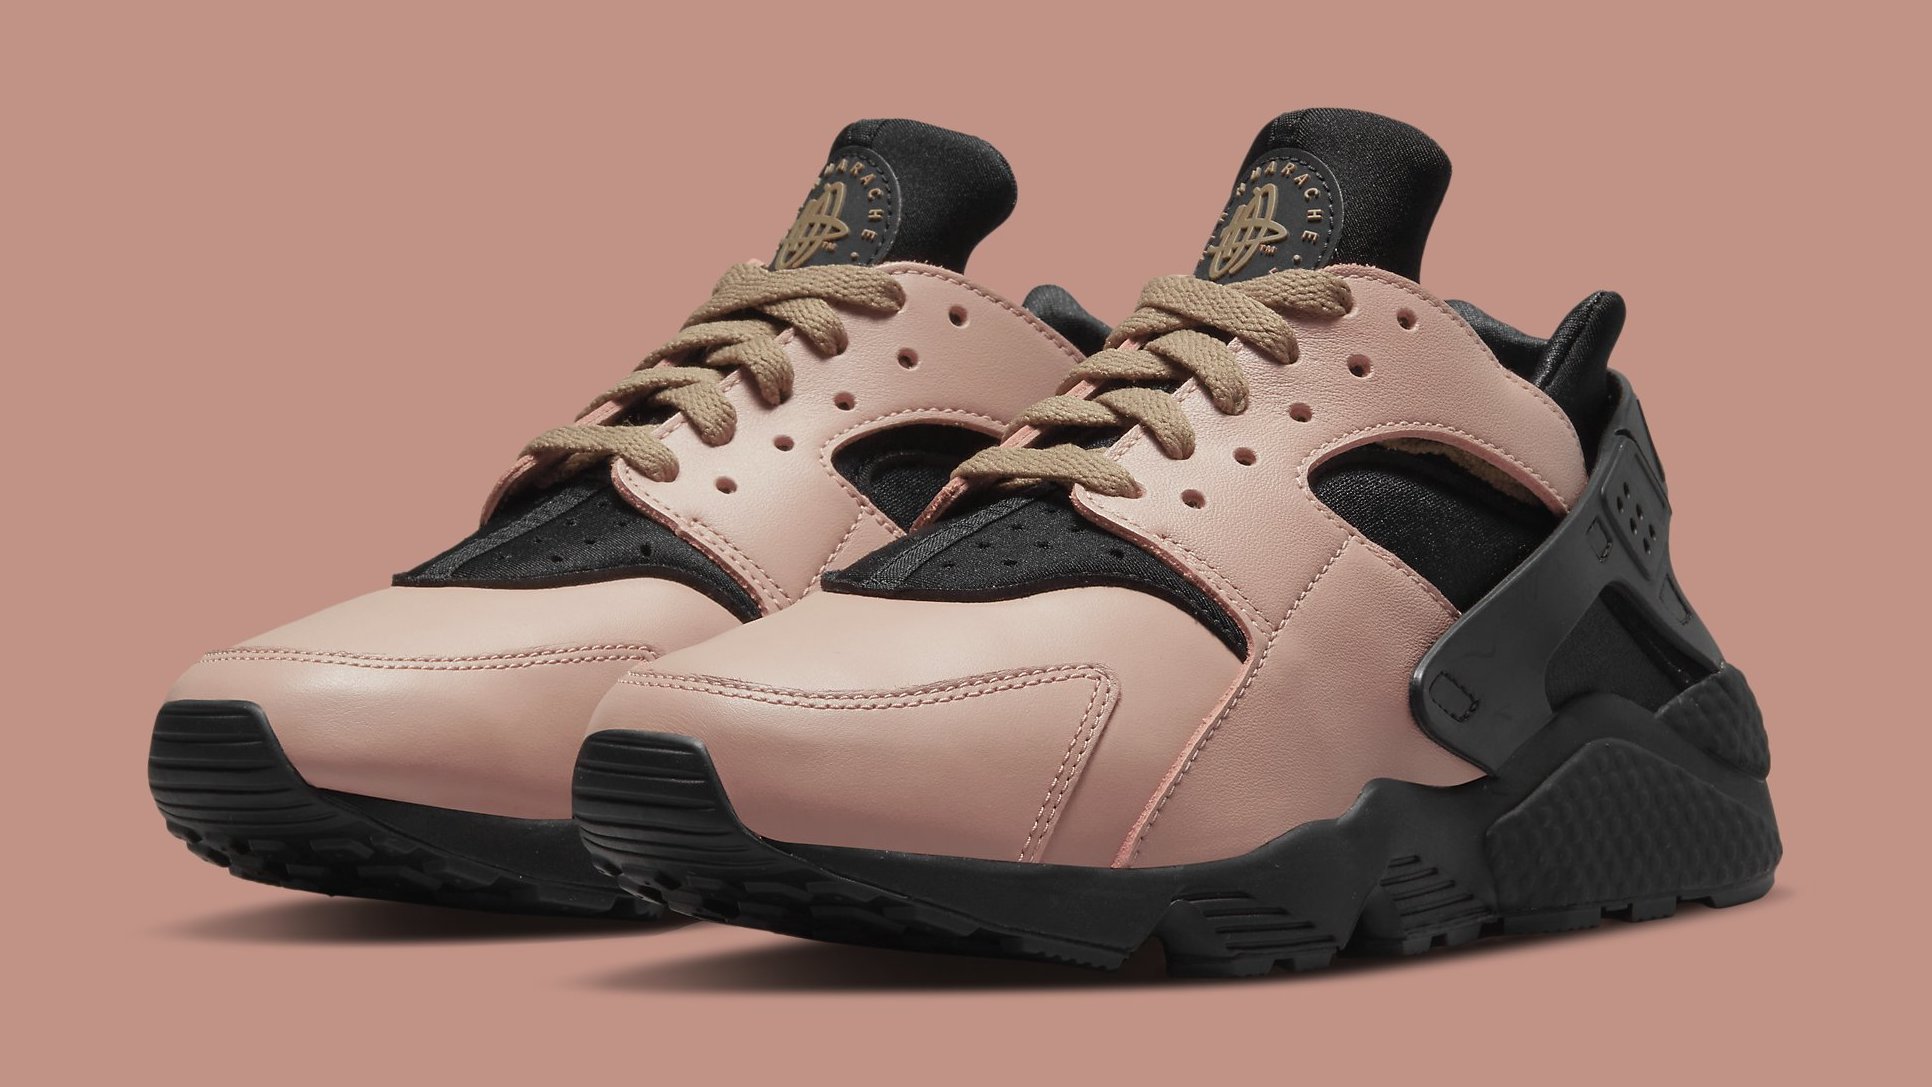 adviseren inspanning offset Nike Air Huarache 'Toadstool' 2021 Release Date DH8143-200​​​​​​​ | Sole  Collector